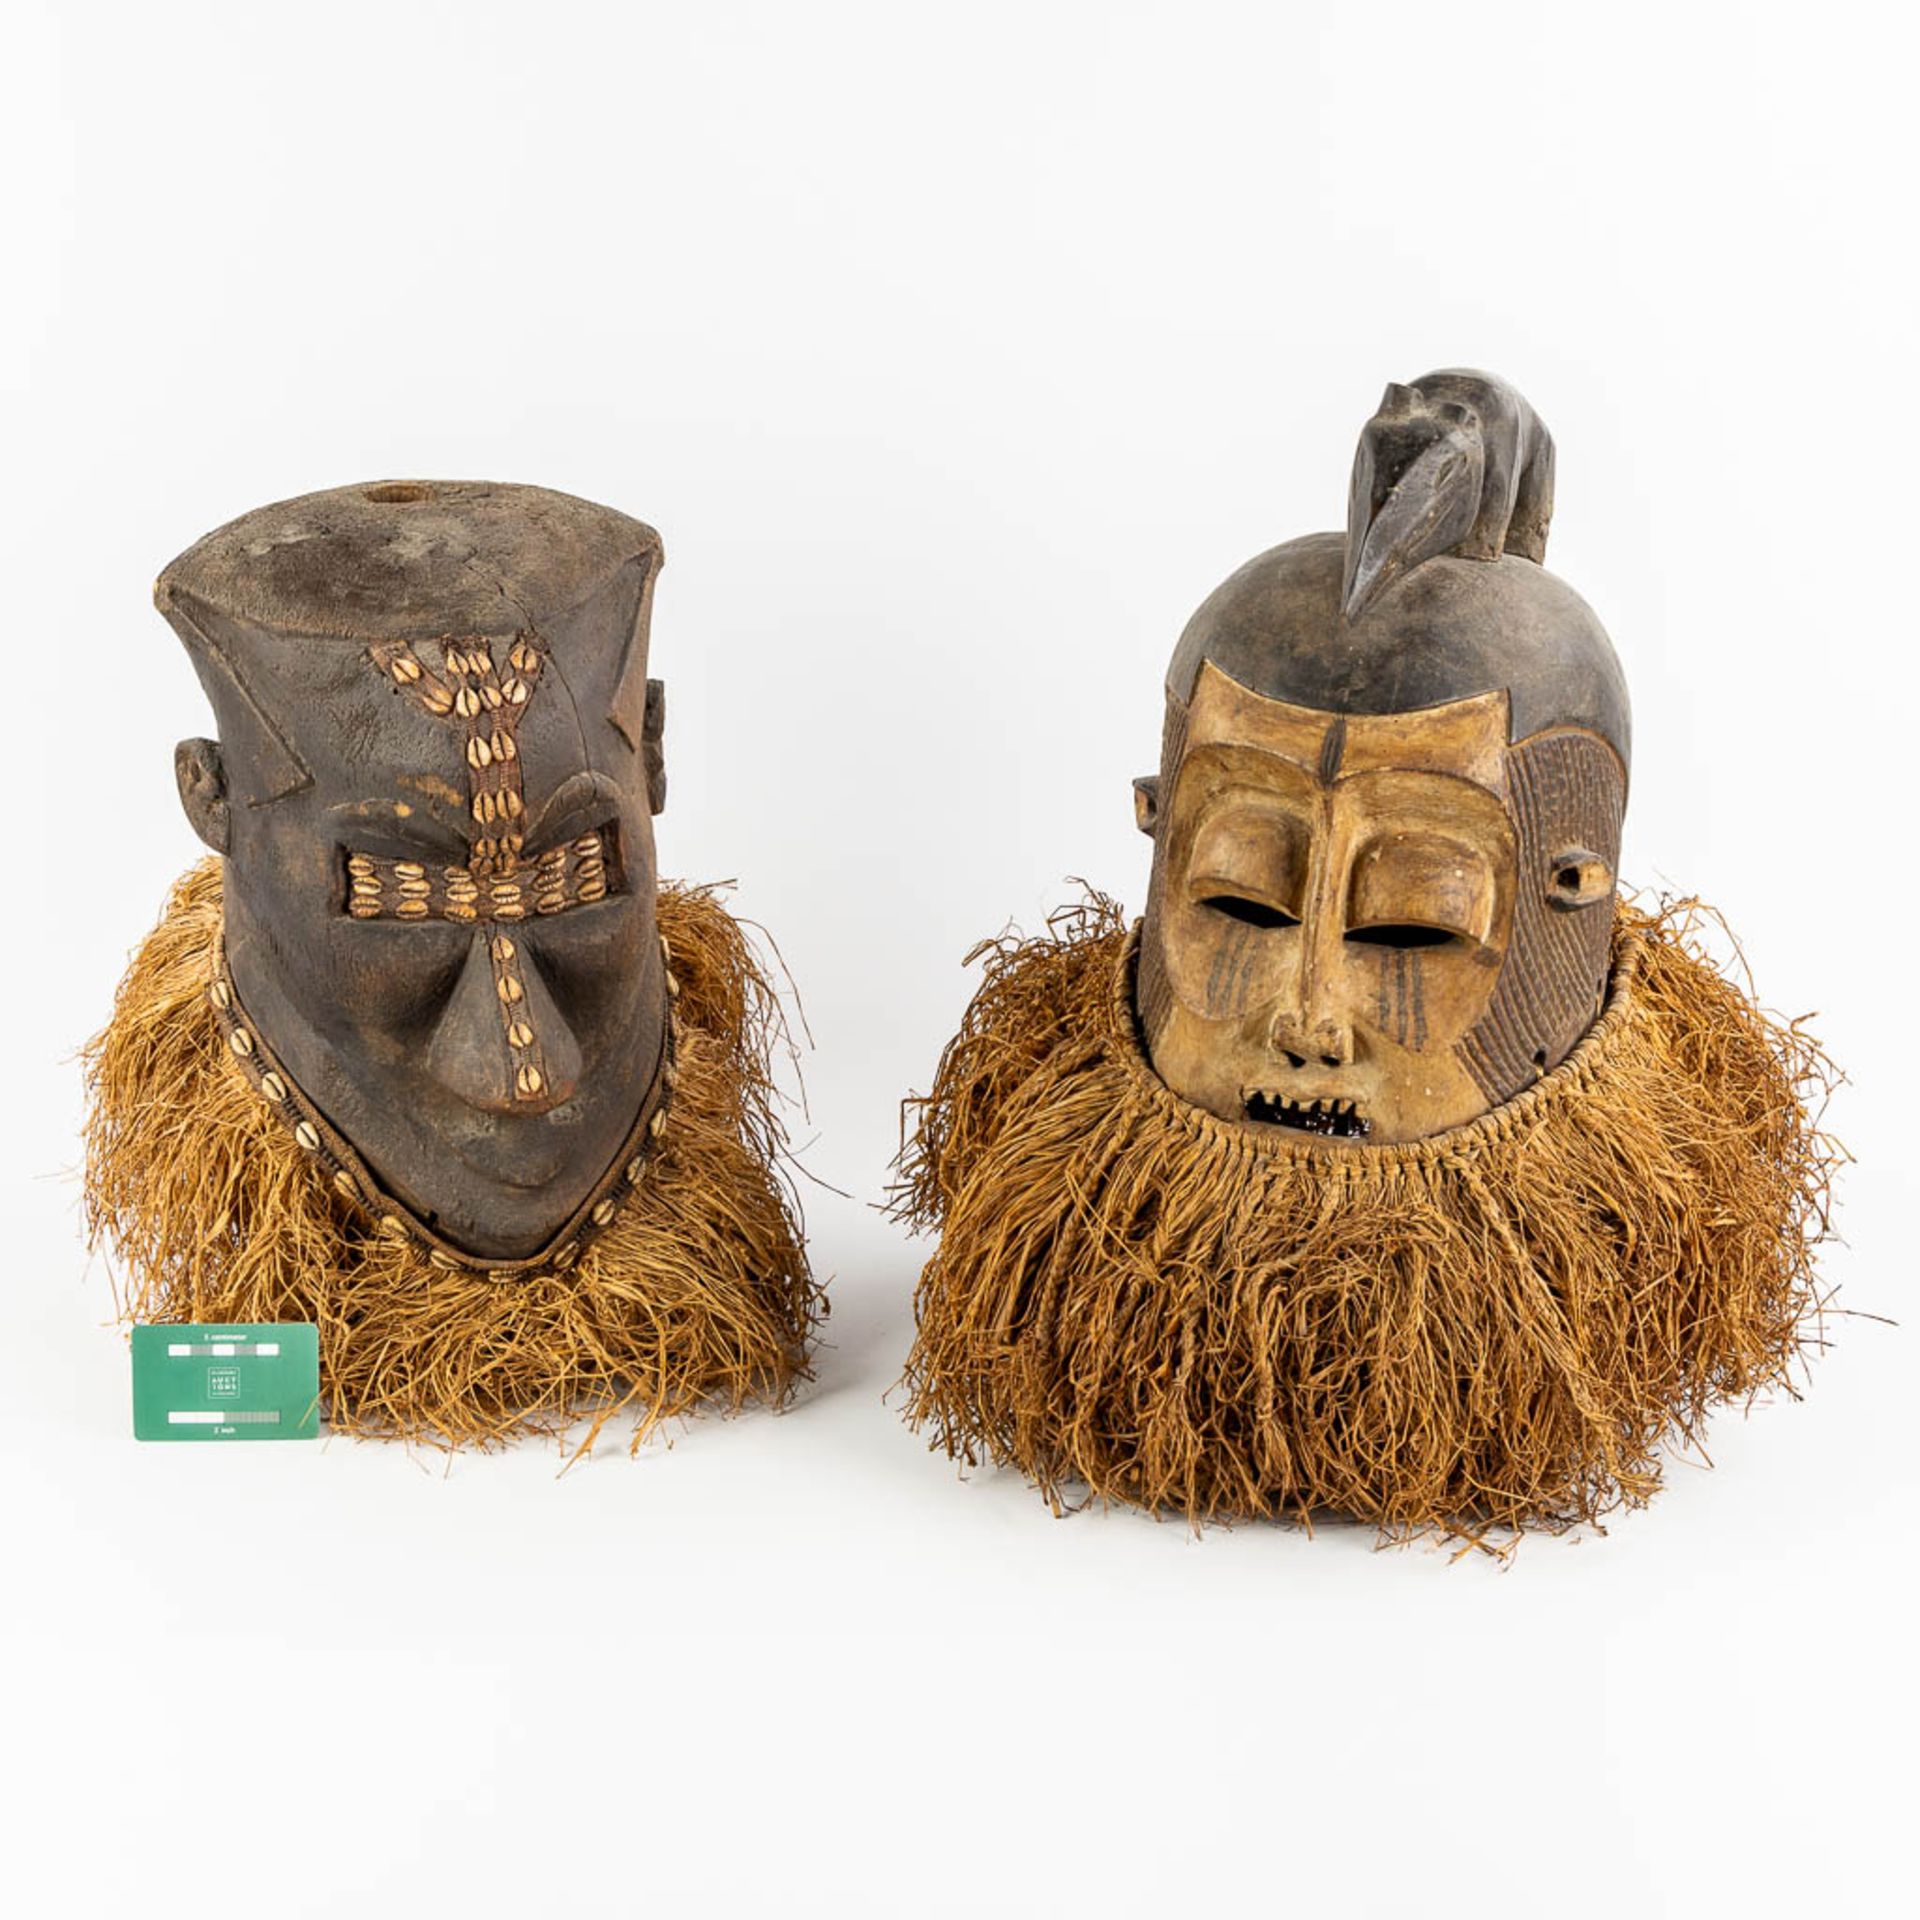 Suku Tribe, two decorative African masks. Wood and straw. (L:44 x W:40 x H:48 cm) - Image 2 of 11